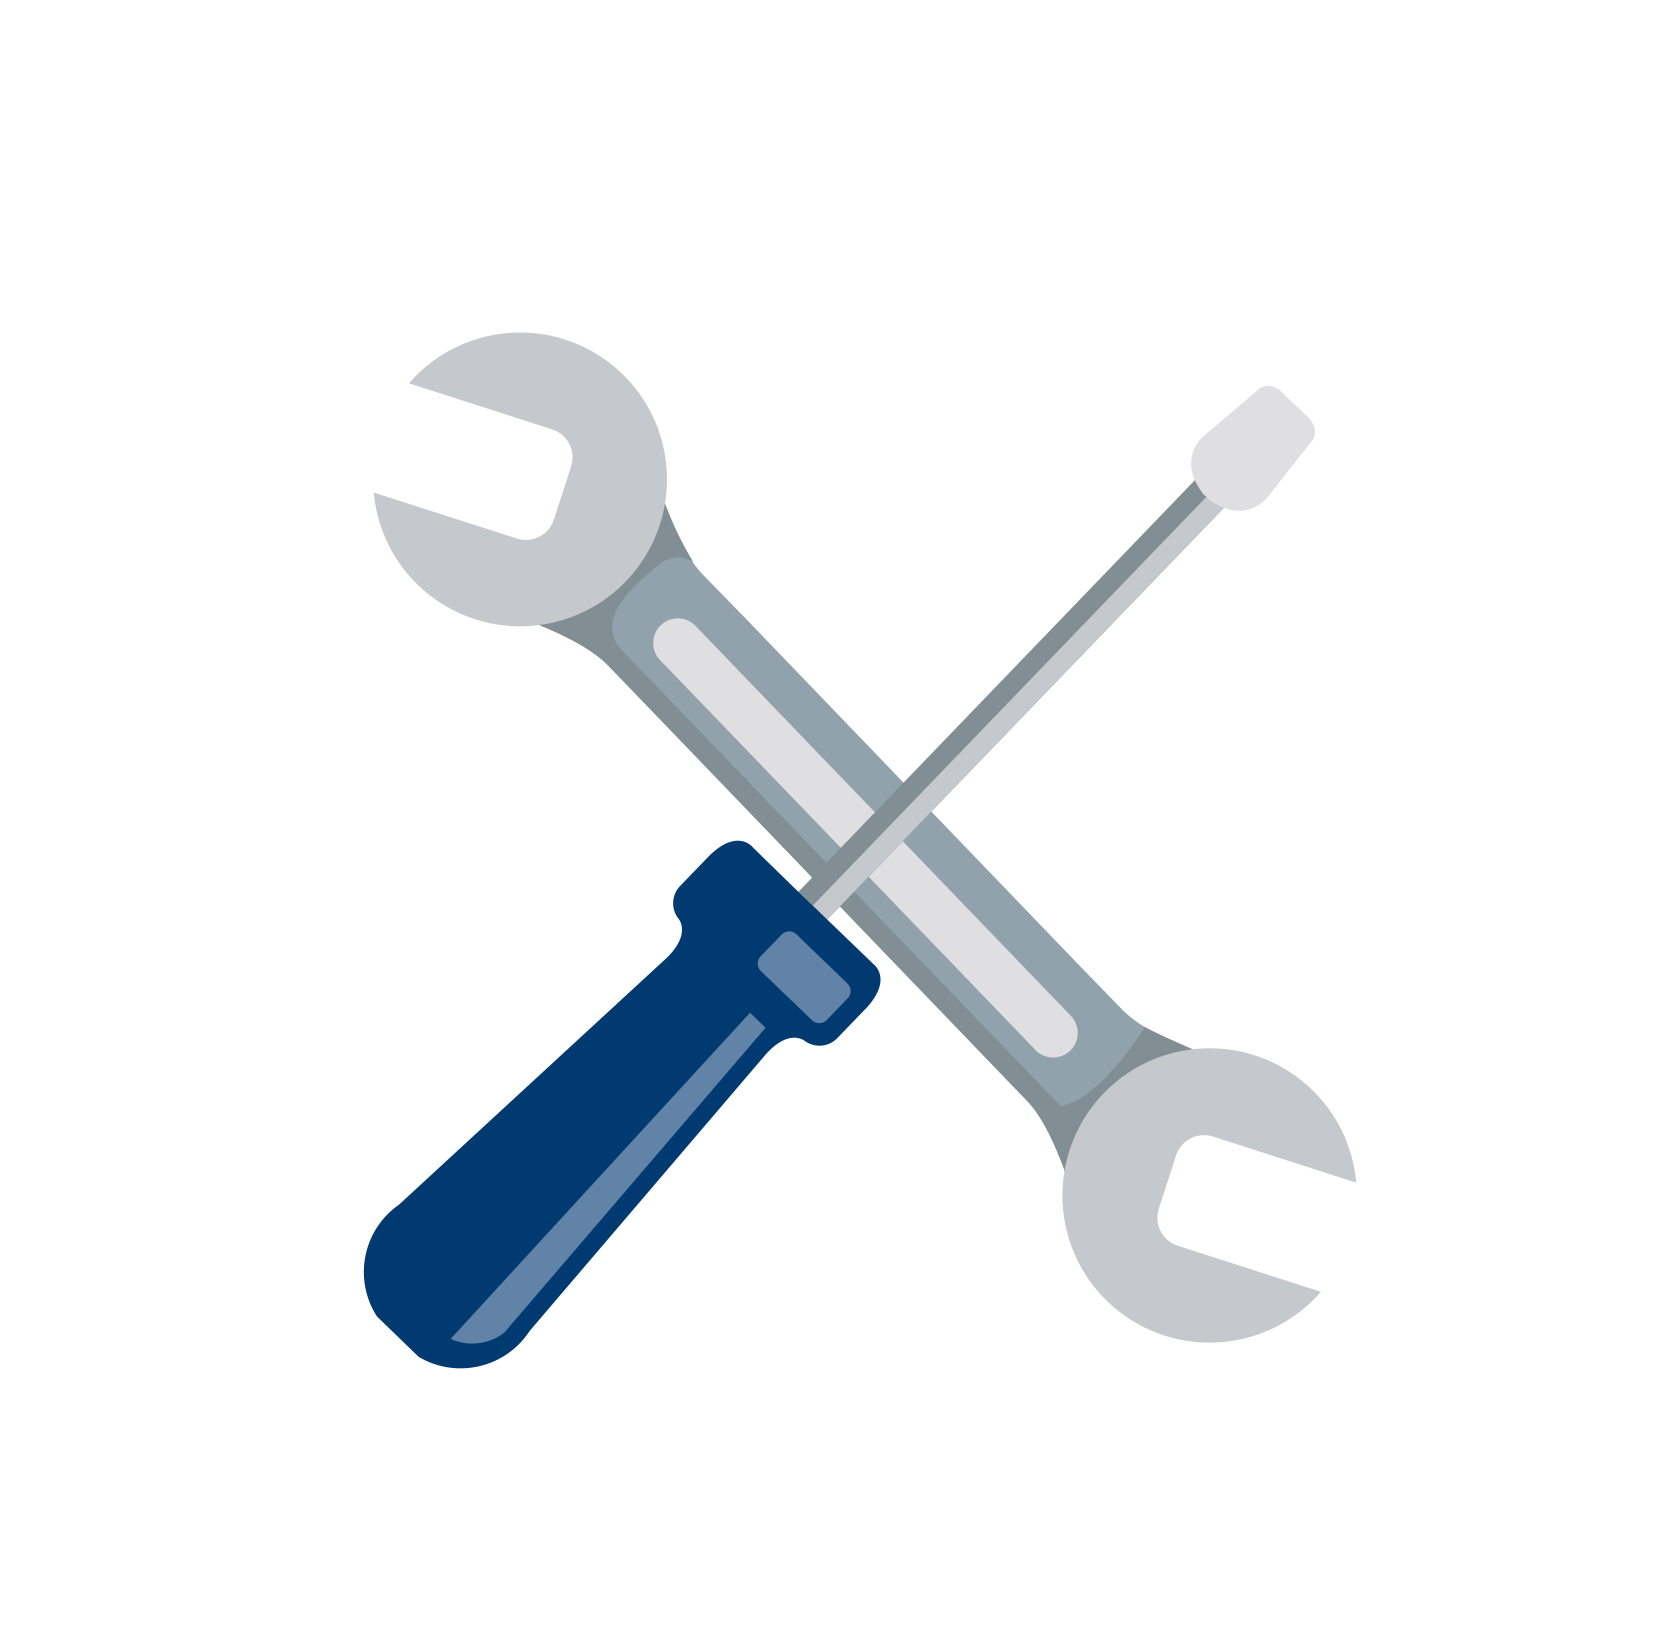 Gray screwdriver with dark blue handle on top of gray wrench.